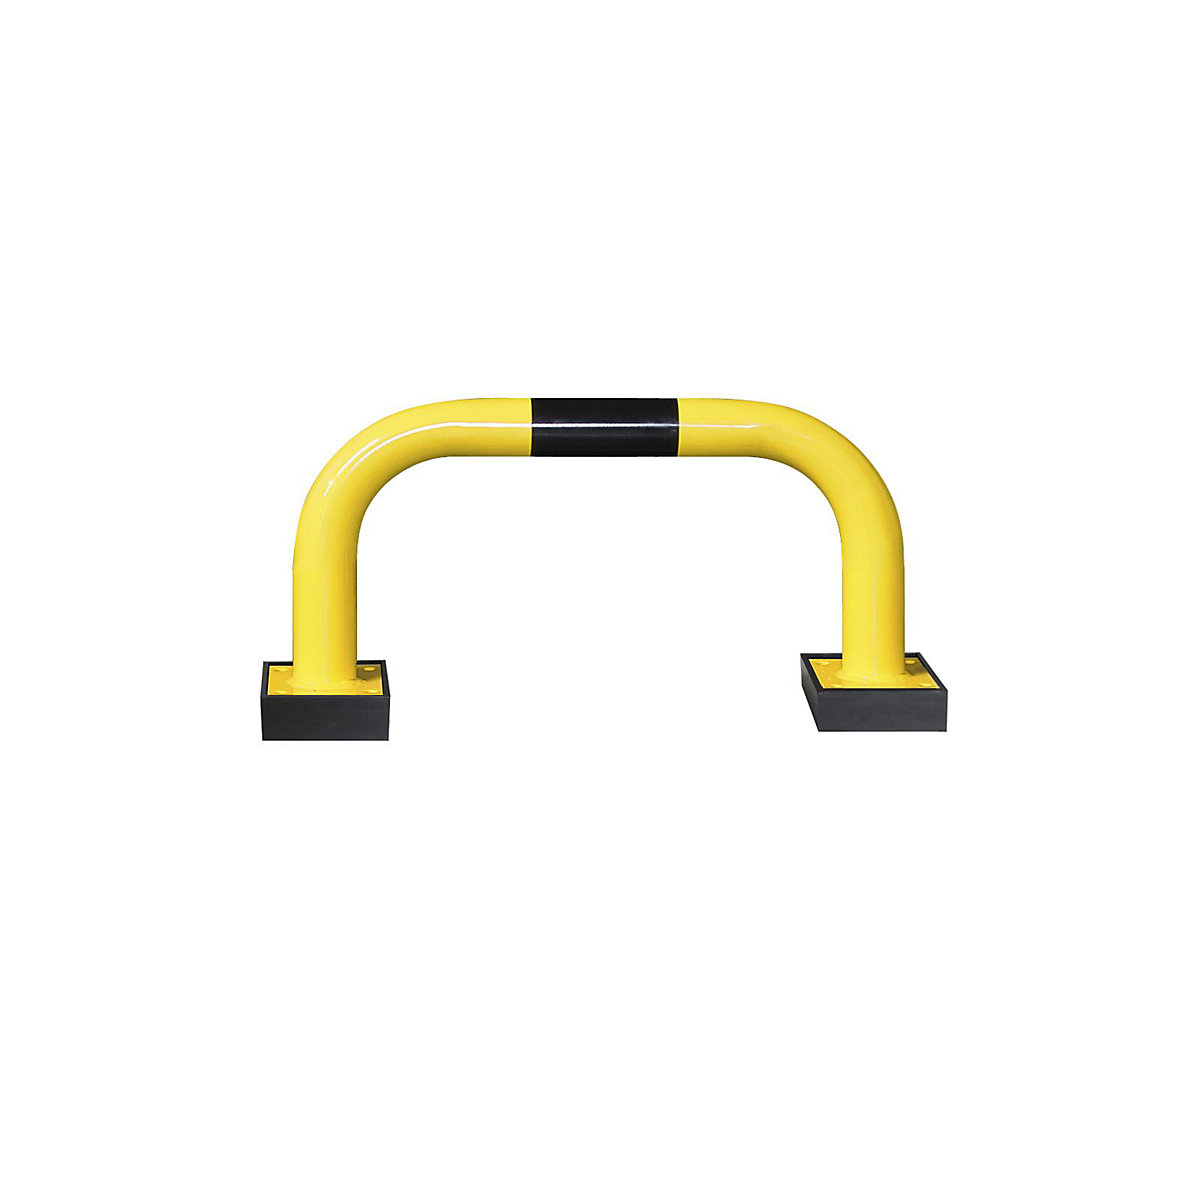 Crash protection bar, flexible, for indoor use, HxW 390 x 750 mm-6